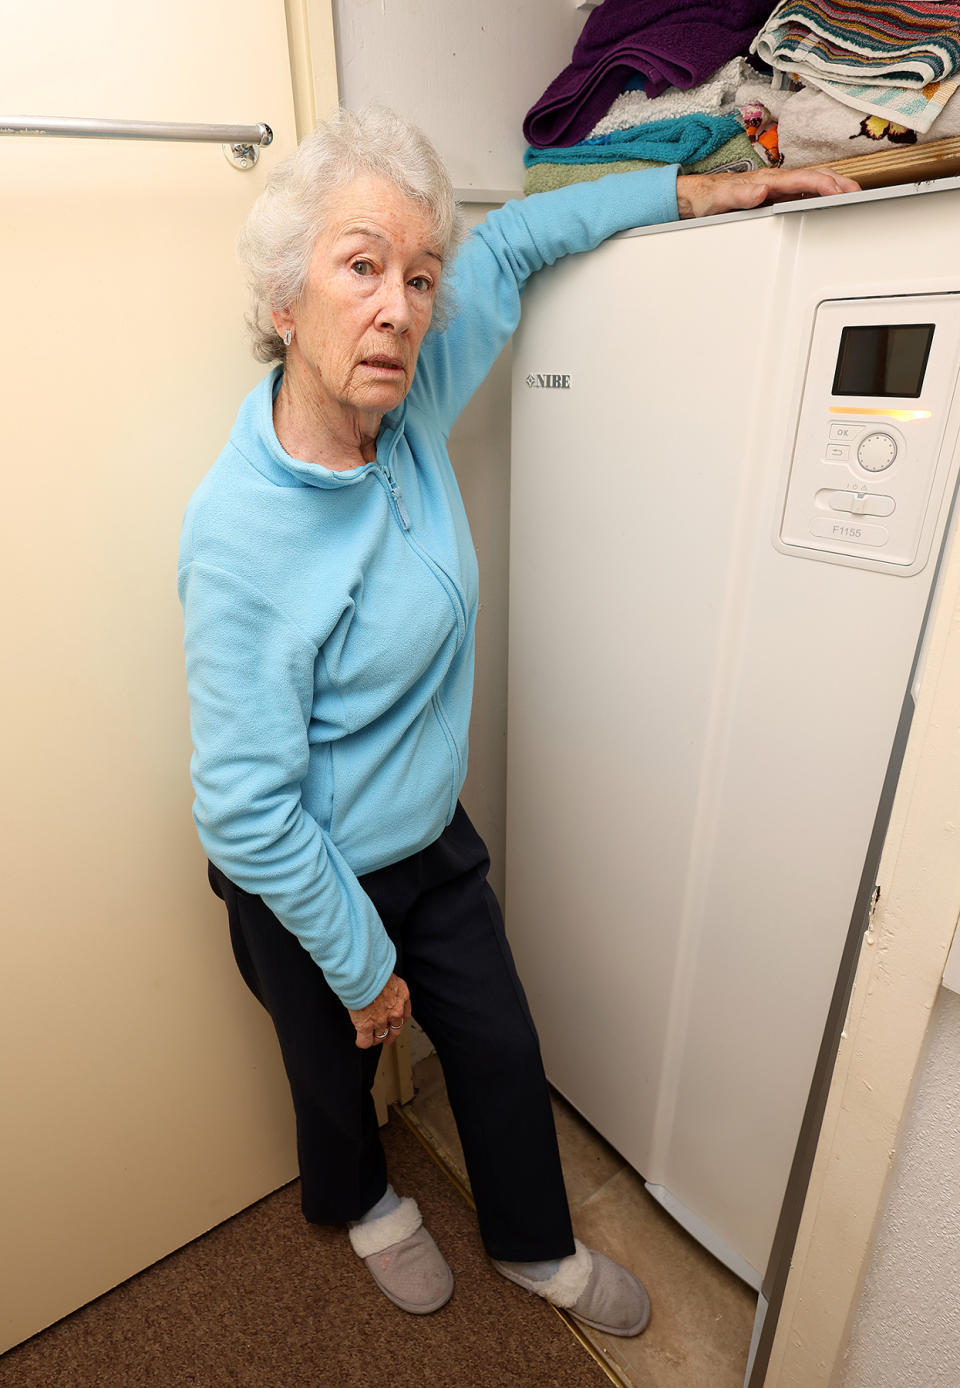 Yvonne Johnson fears her broken heating system will not be fixed before Christmas. (Reach)